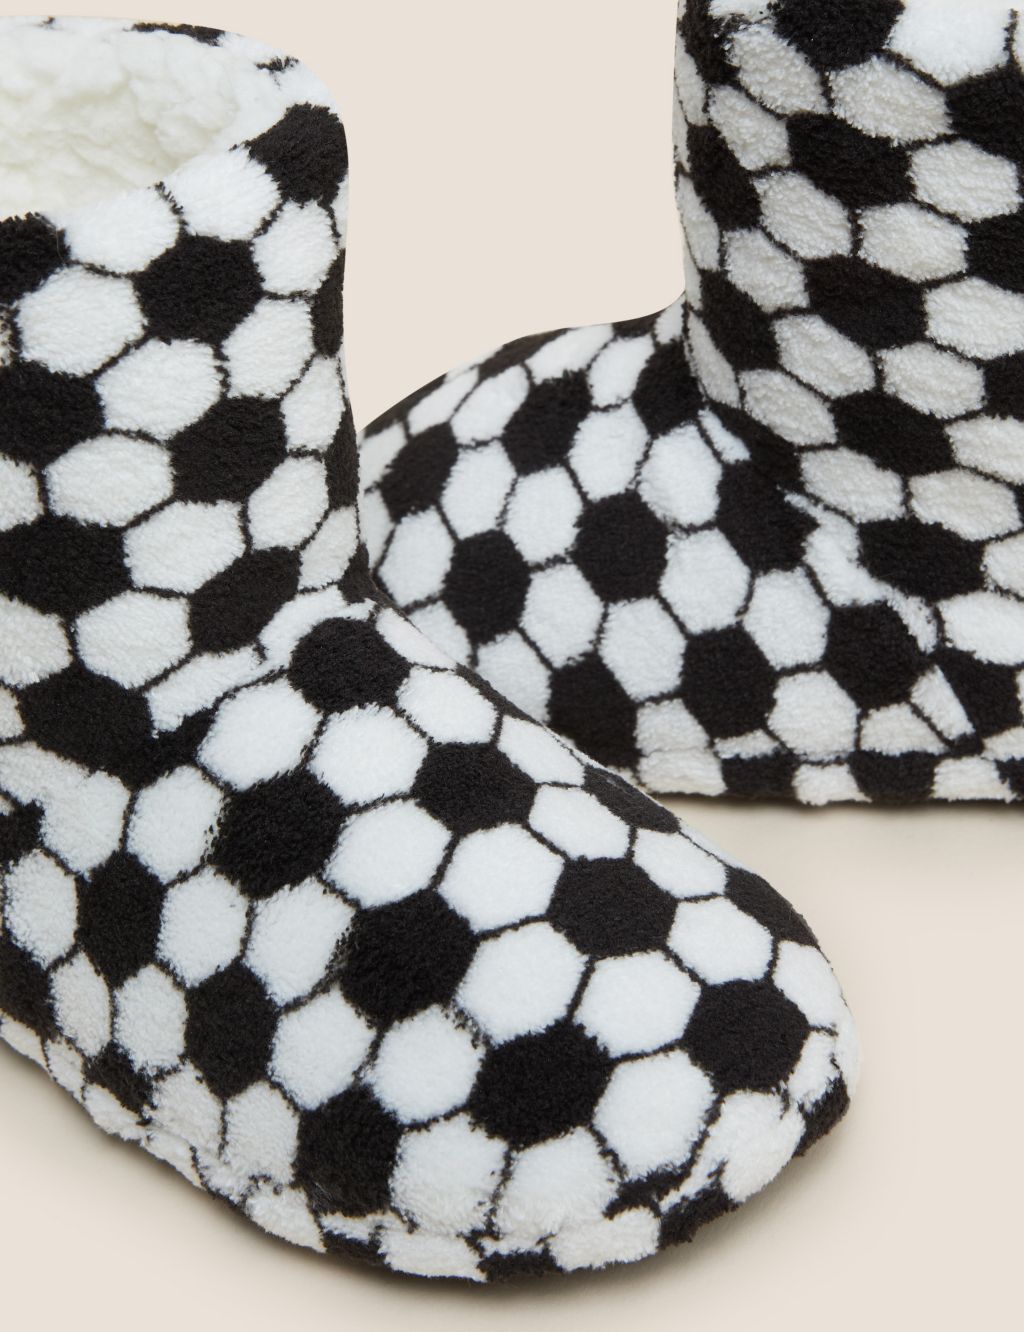 Football Slipper Boots (4 Small - 7 Large) image 3